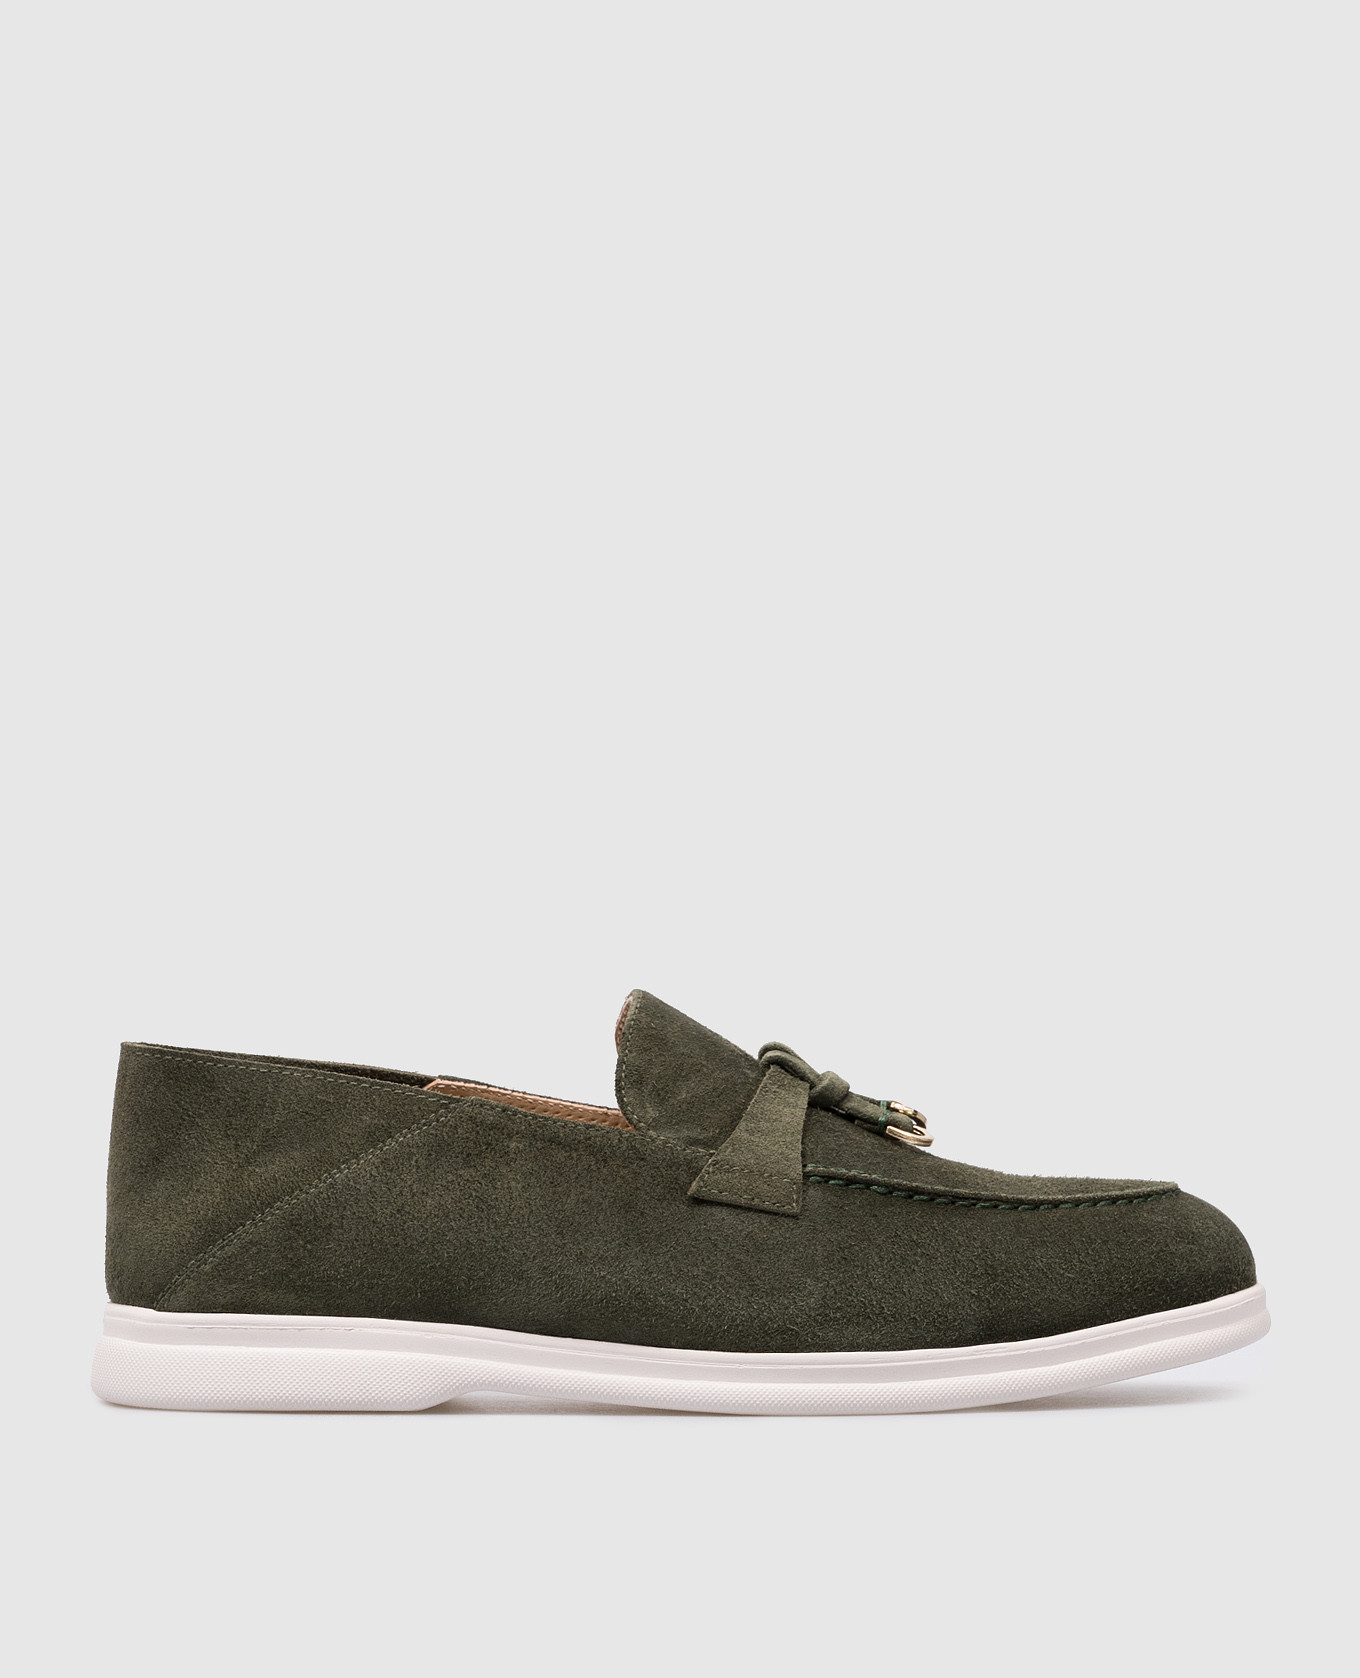 Coco green suede loafers